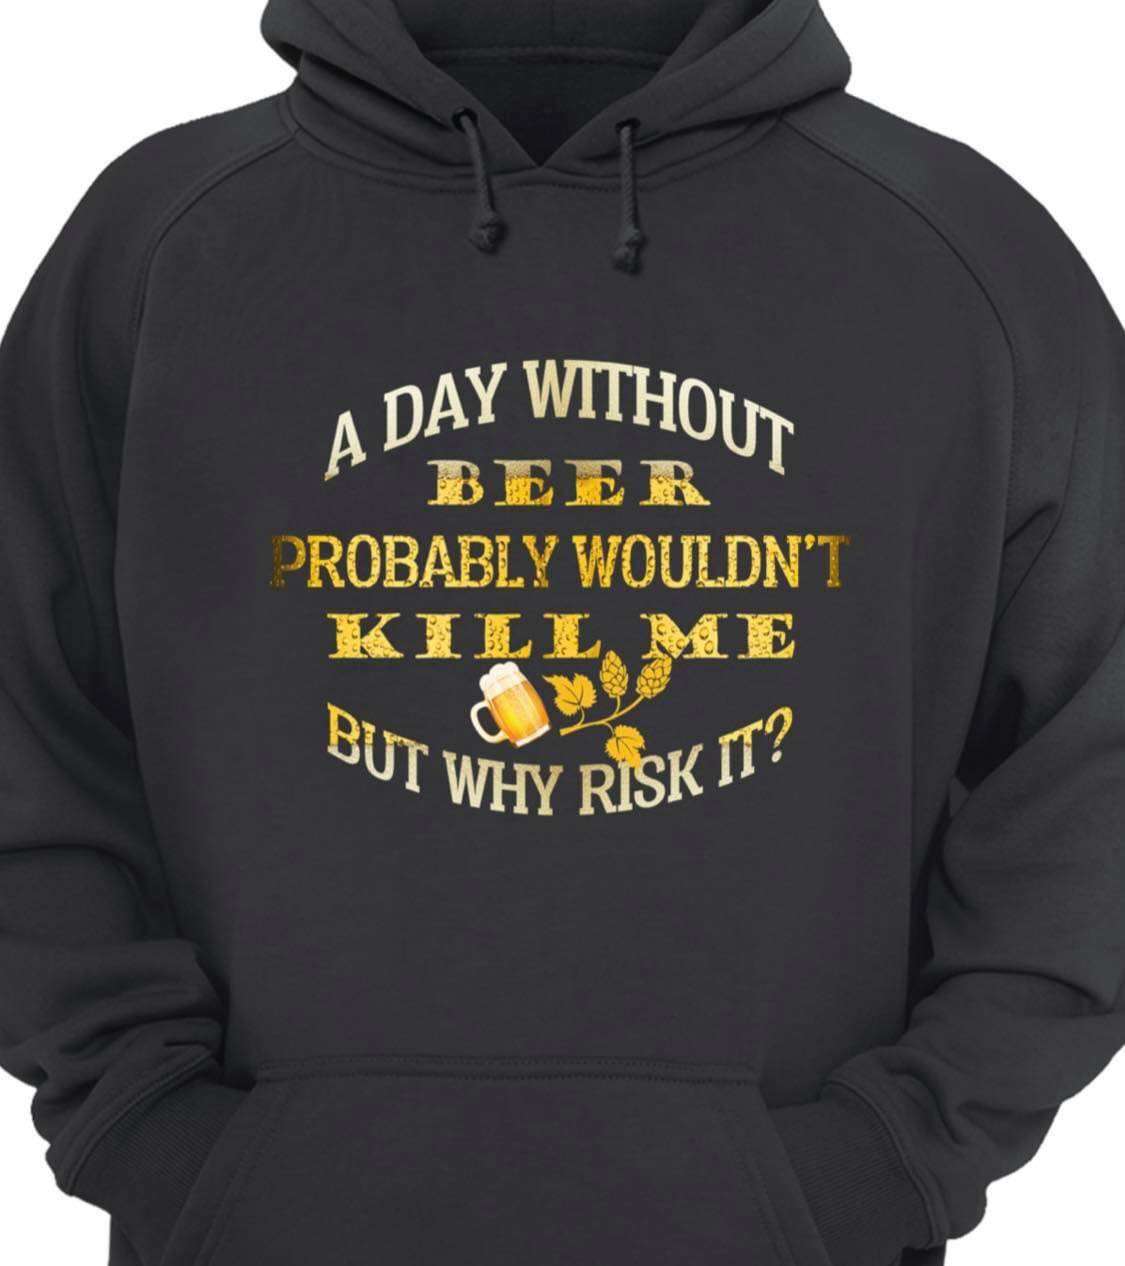 A day without beer probably wouldn't kill me but why risk it - Gift for beer lover, beer drinking lover